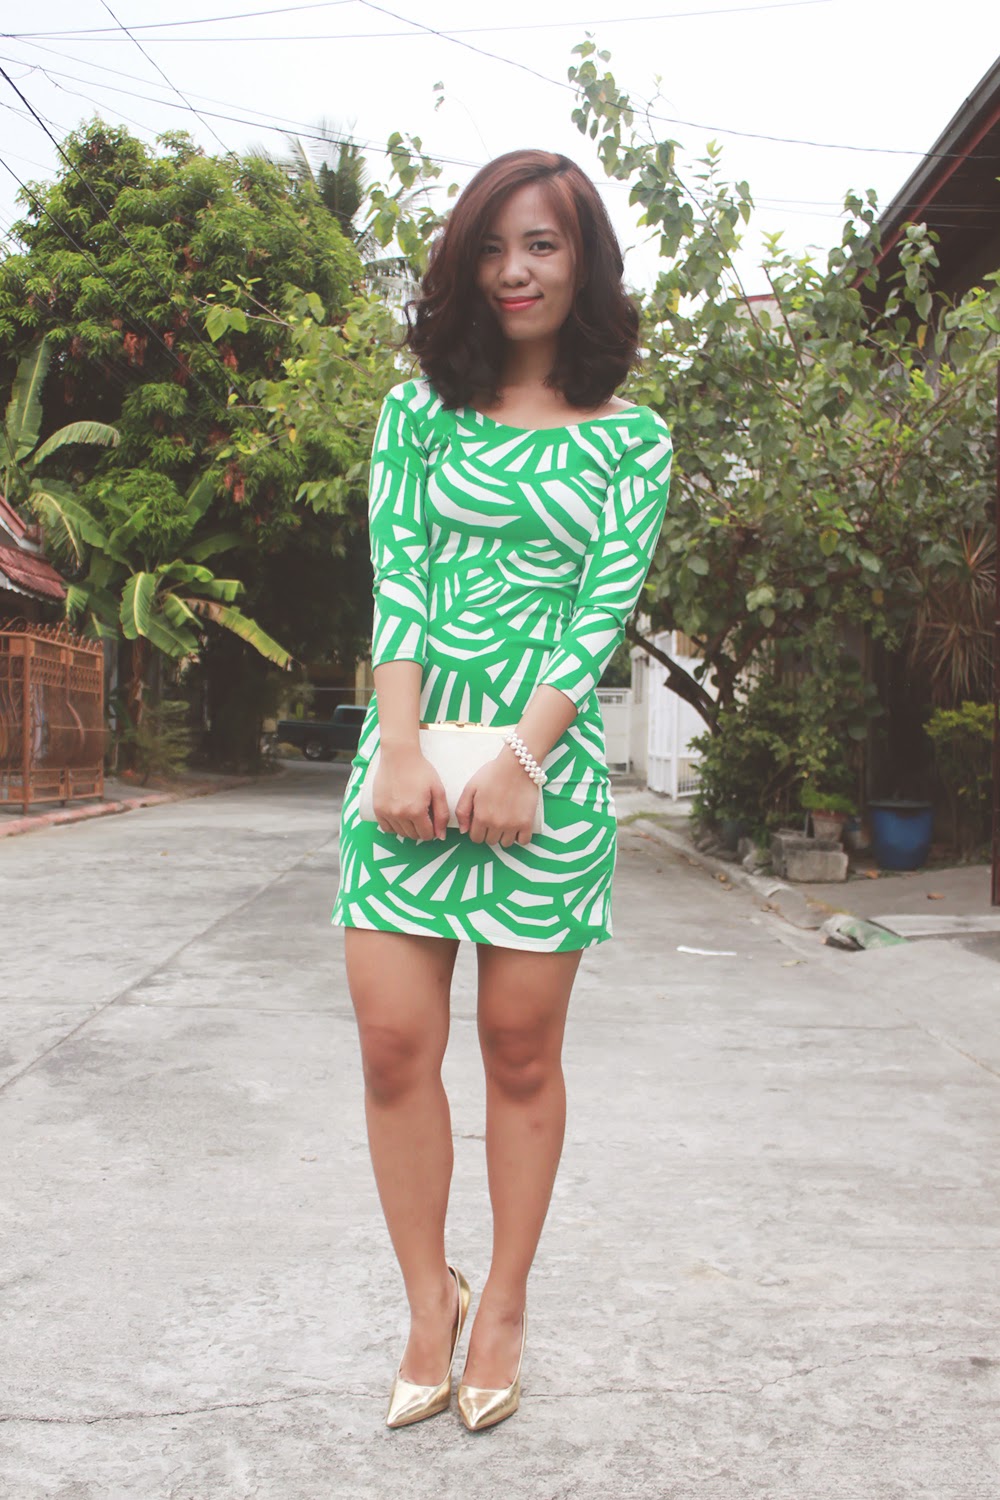 The Girl In the Green Dress - Style Surgery : Lifestyle Blog